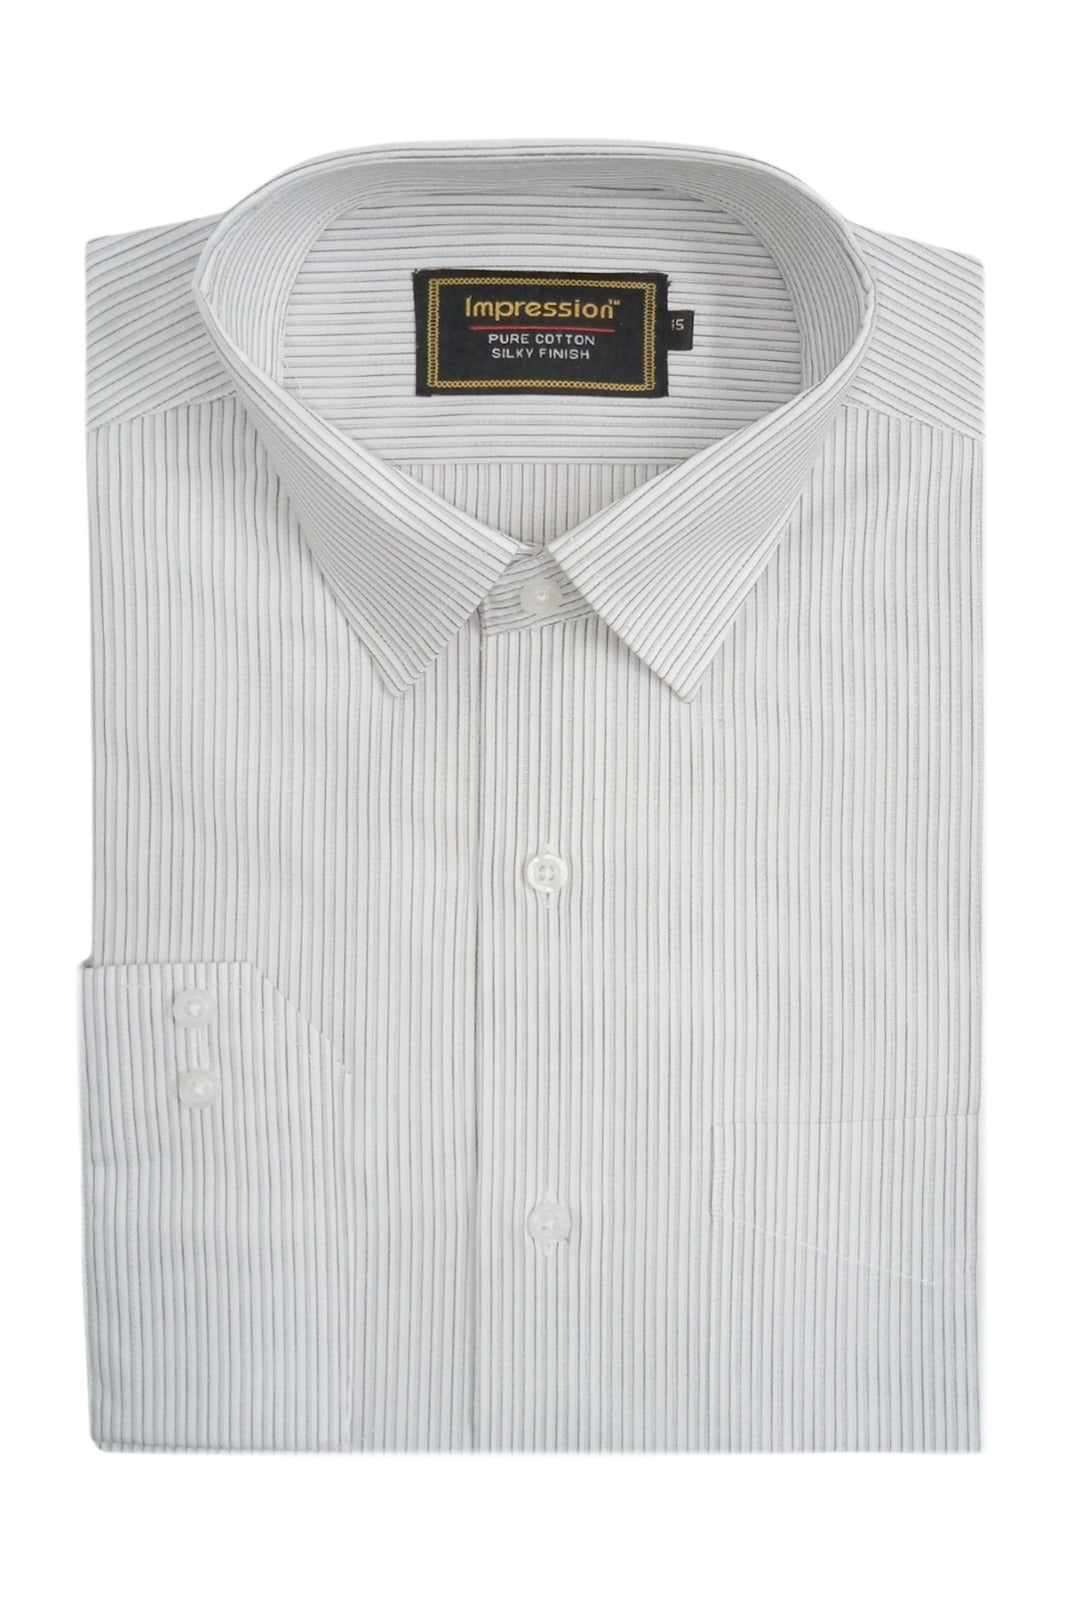 White And Grey Striped Dress Shirt